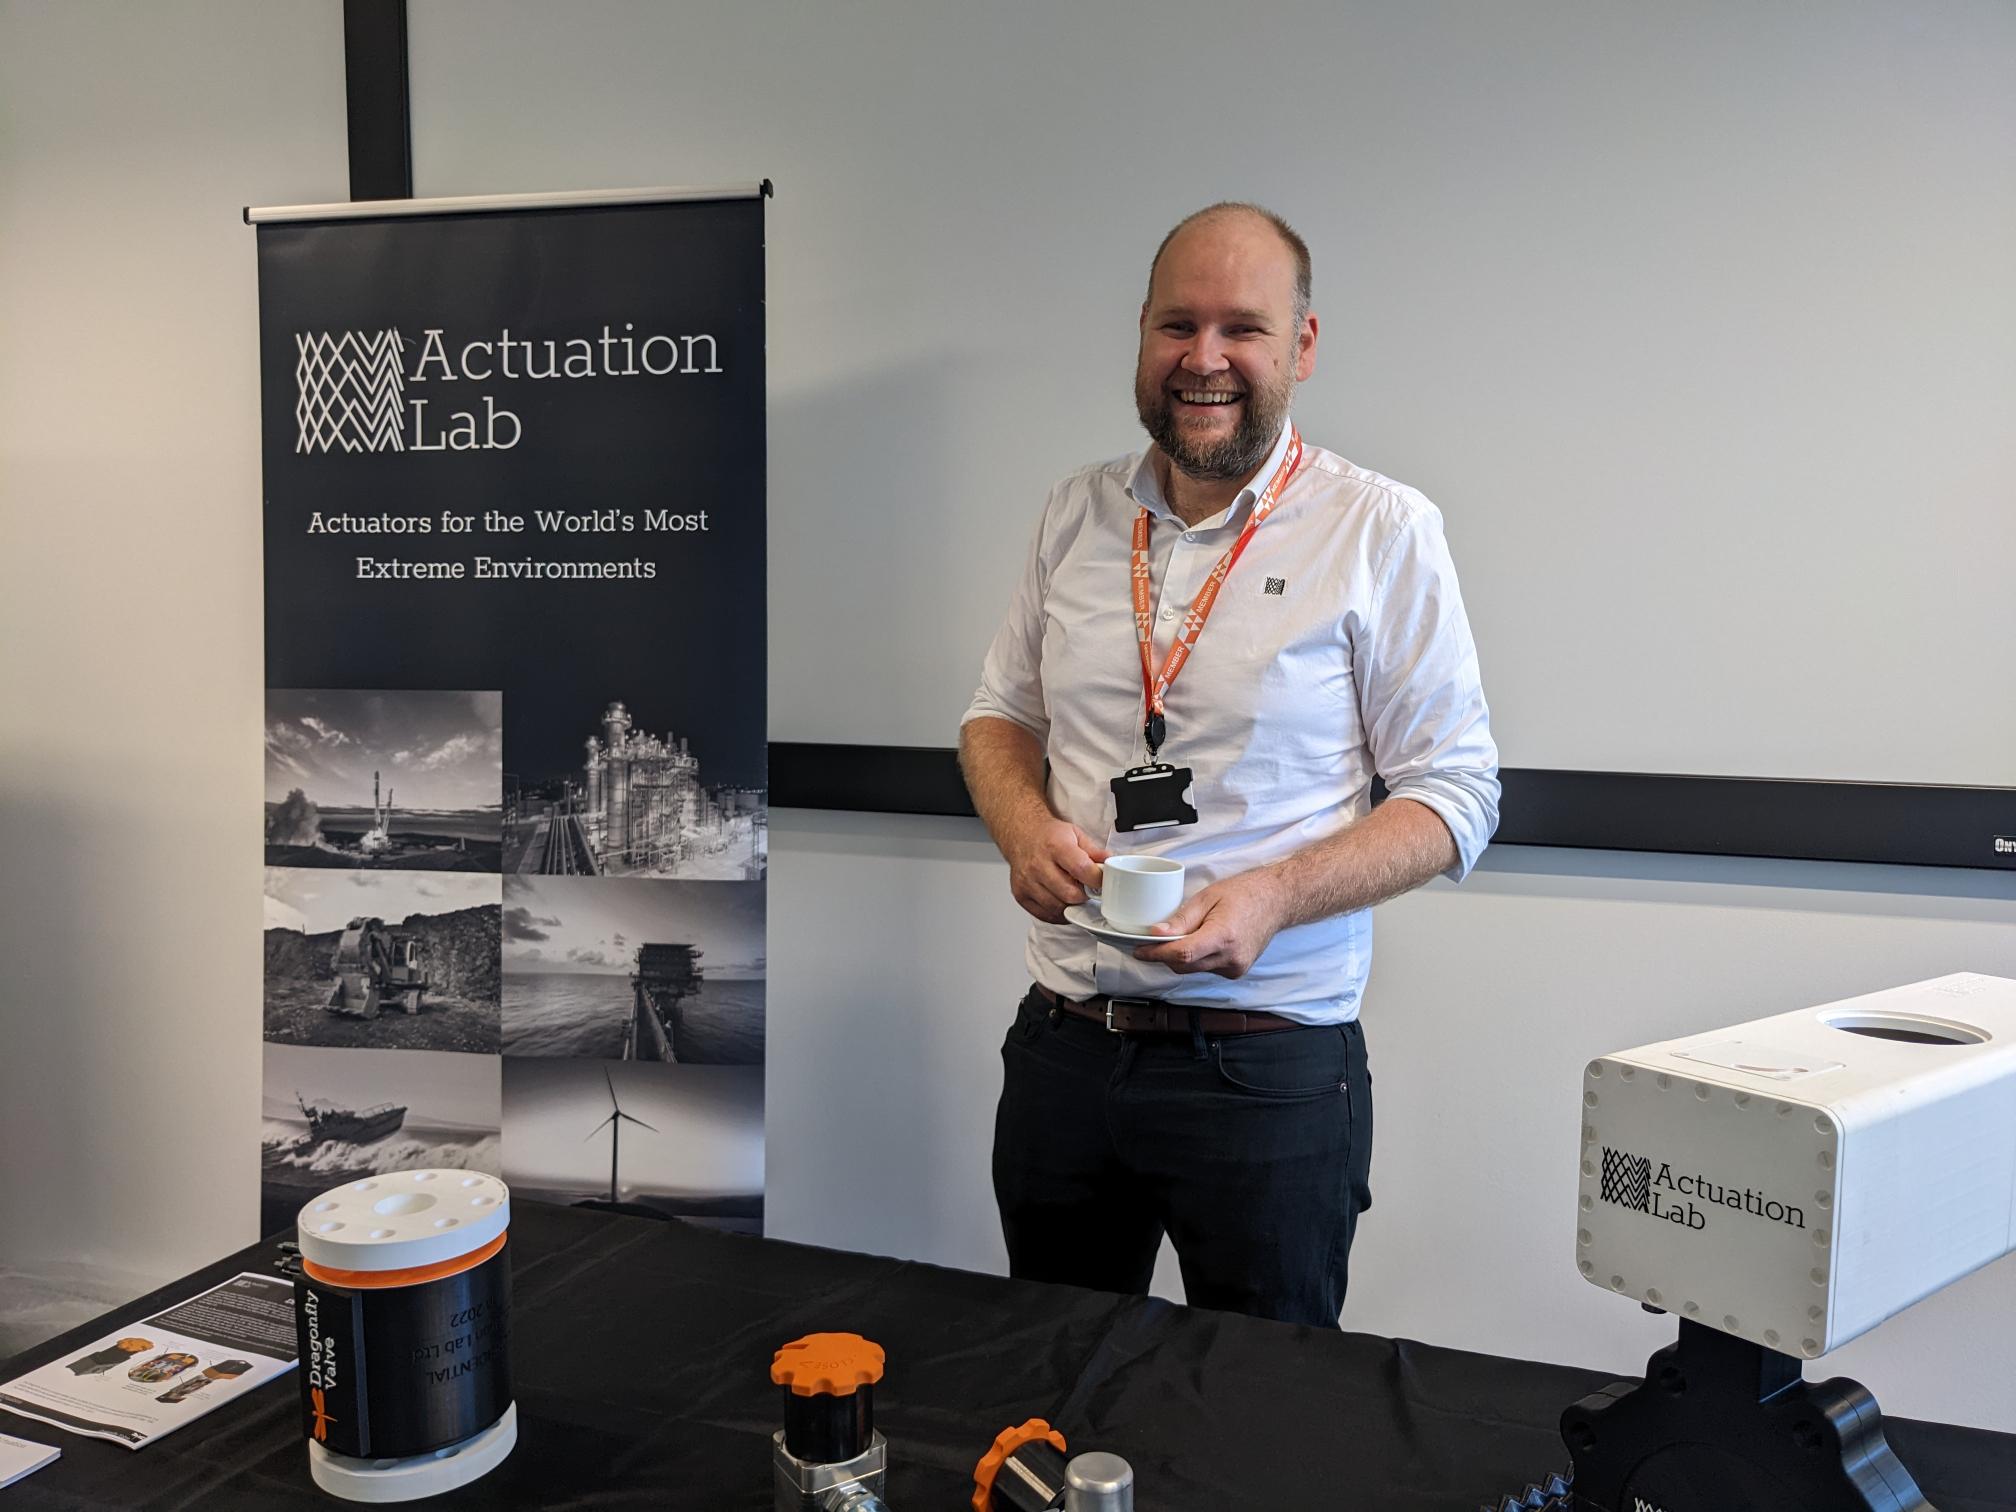 Our CTO Michael Dicker, coffee in hand, manning the Actuation Lab stand at the BVAA Desktop event